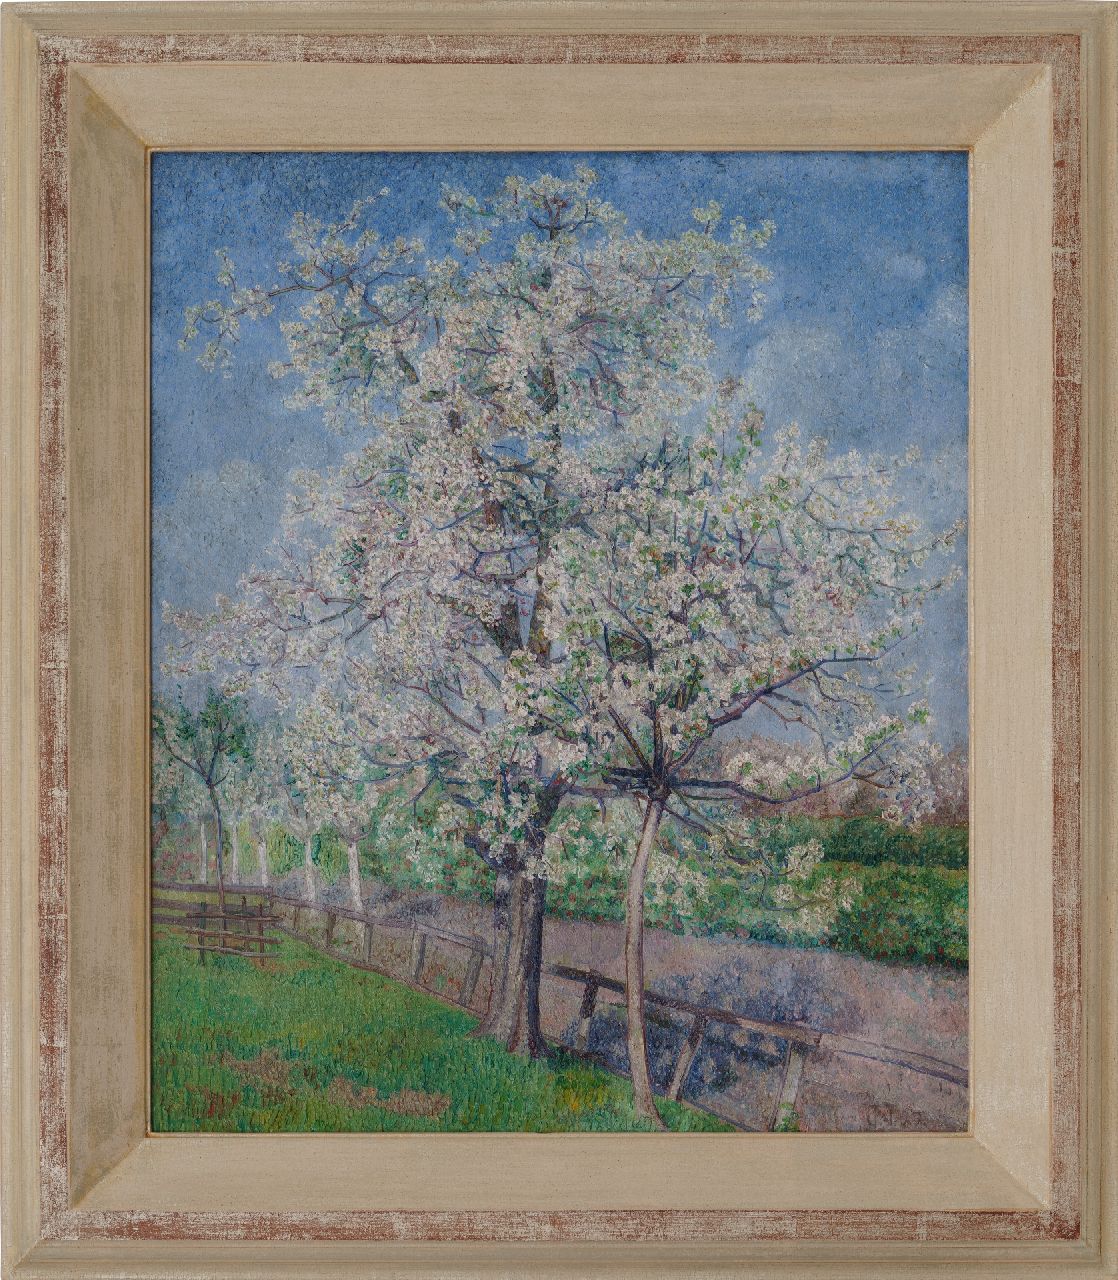 Nieweg J.  | Jakob Nieweg, Trees in bloom along a fence, oil on canvas 60.0 x 50.1 cm, signed l.r. with monogram and dated '22